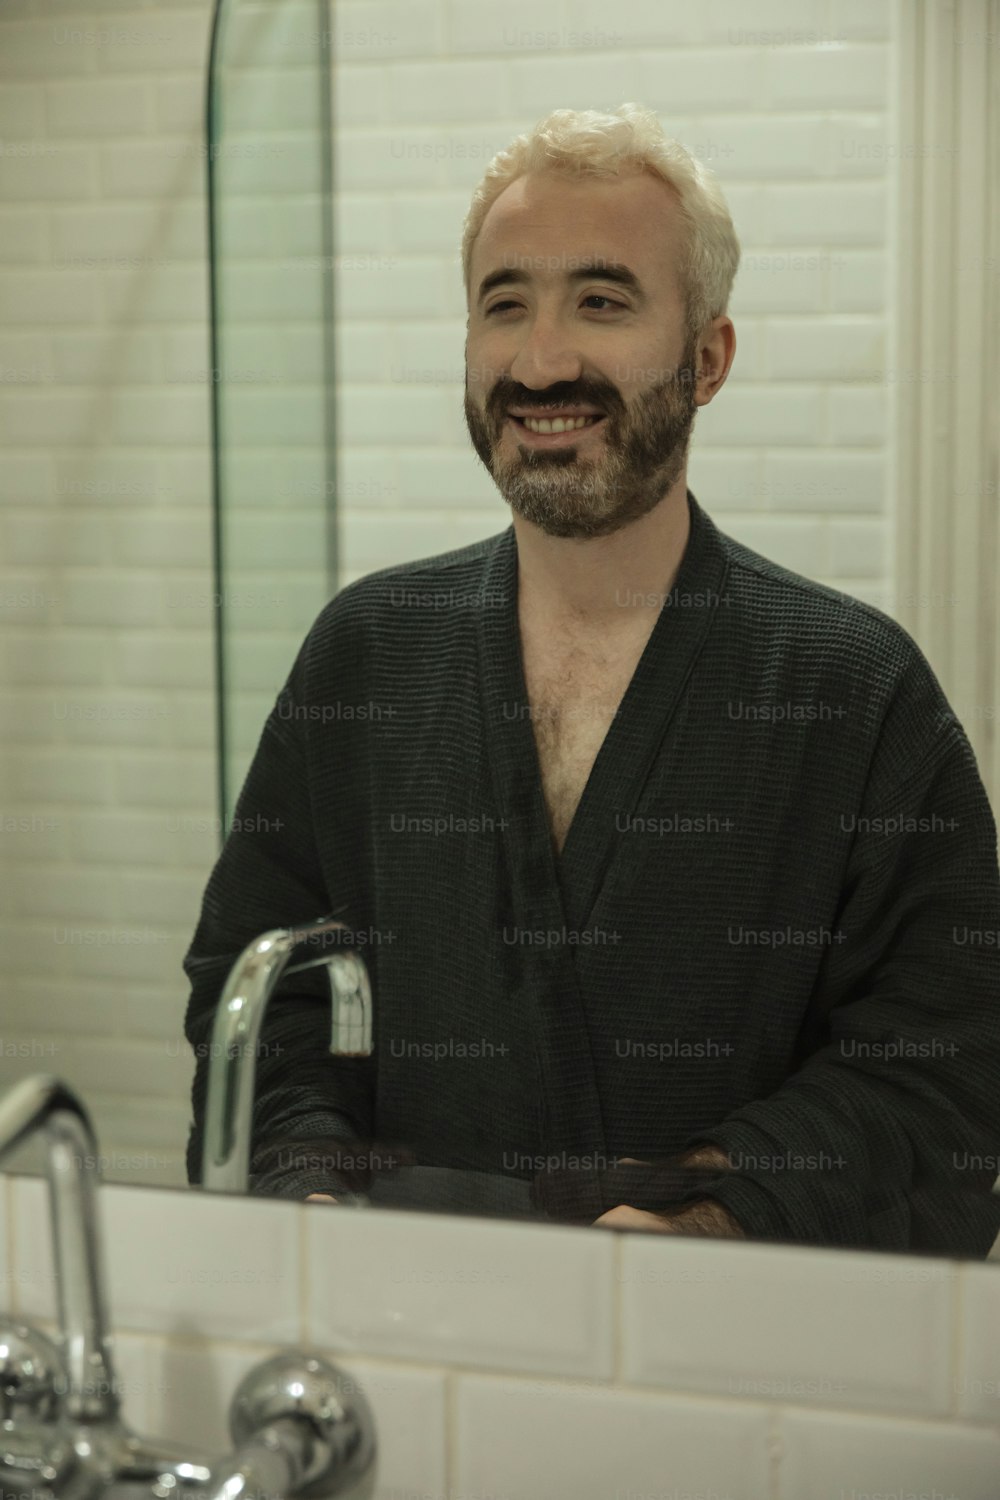 a man with white hair and beard standing in front of a bathroom mirror